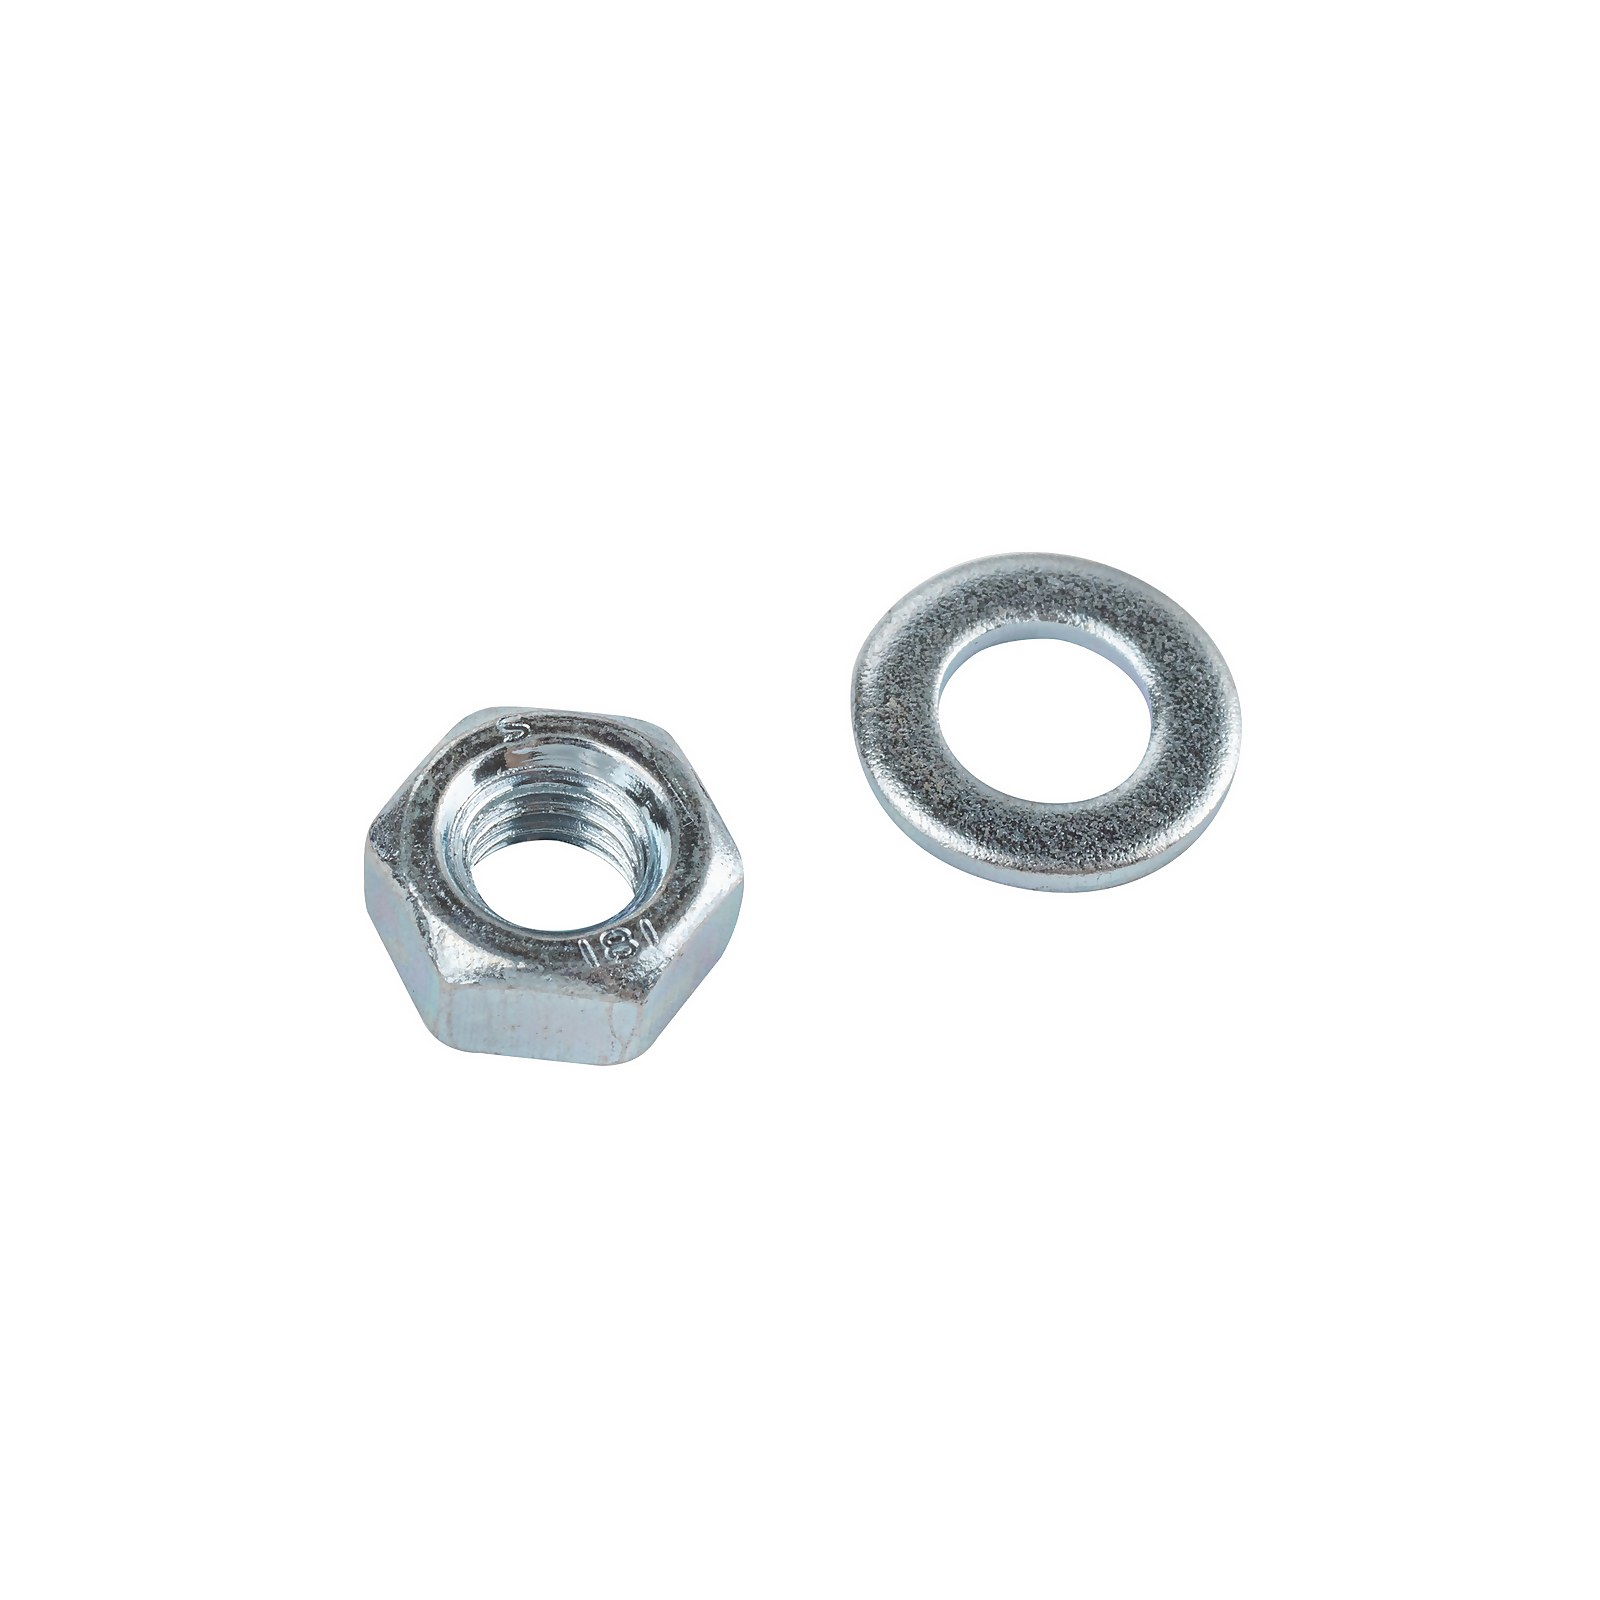 Photo of Homebase Zinc Plated Hex Nut & Washer M4 10 Pack